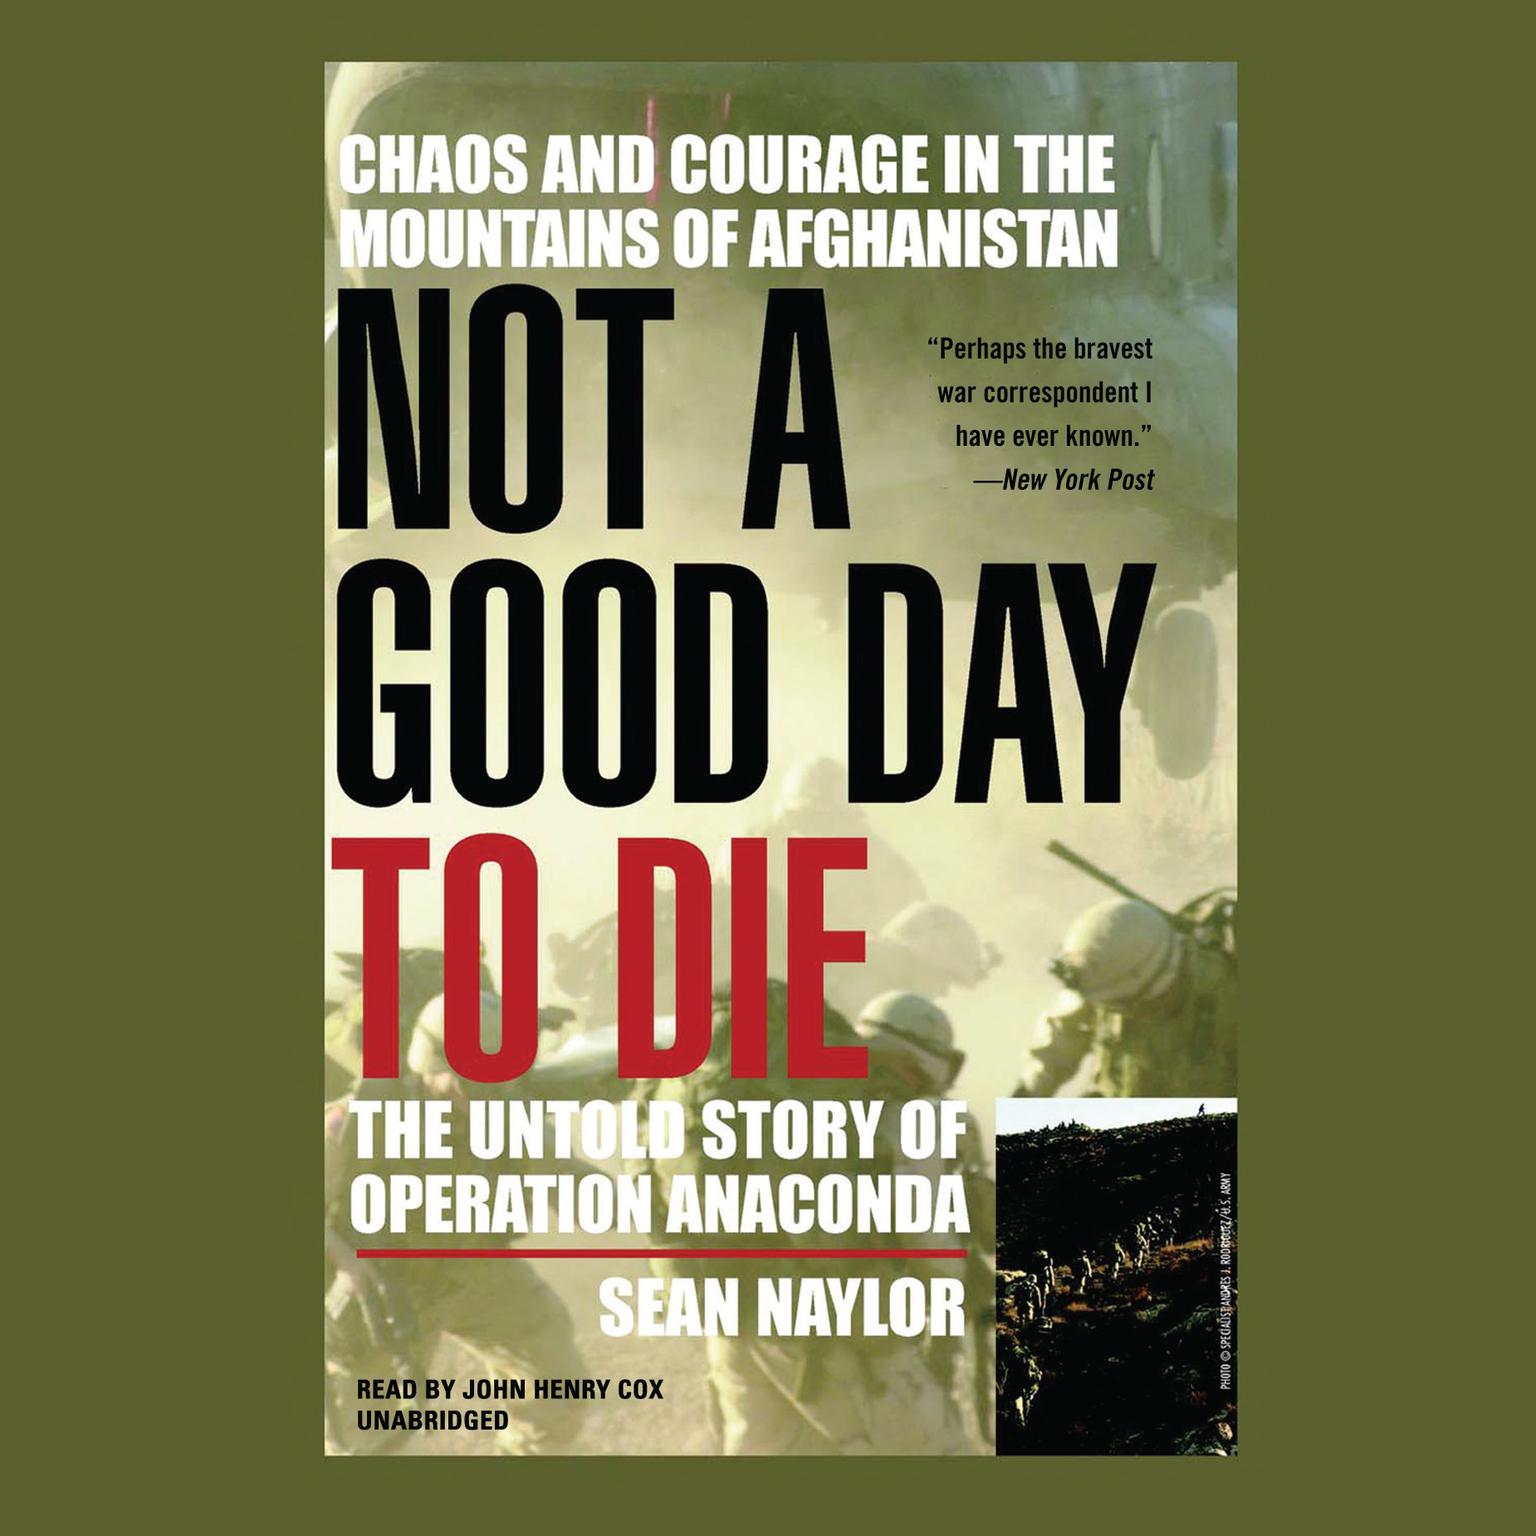 Not a Good Day to Die: The Untold Story of Operation Anaconda Audiobook, by Sean Naylor